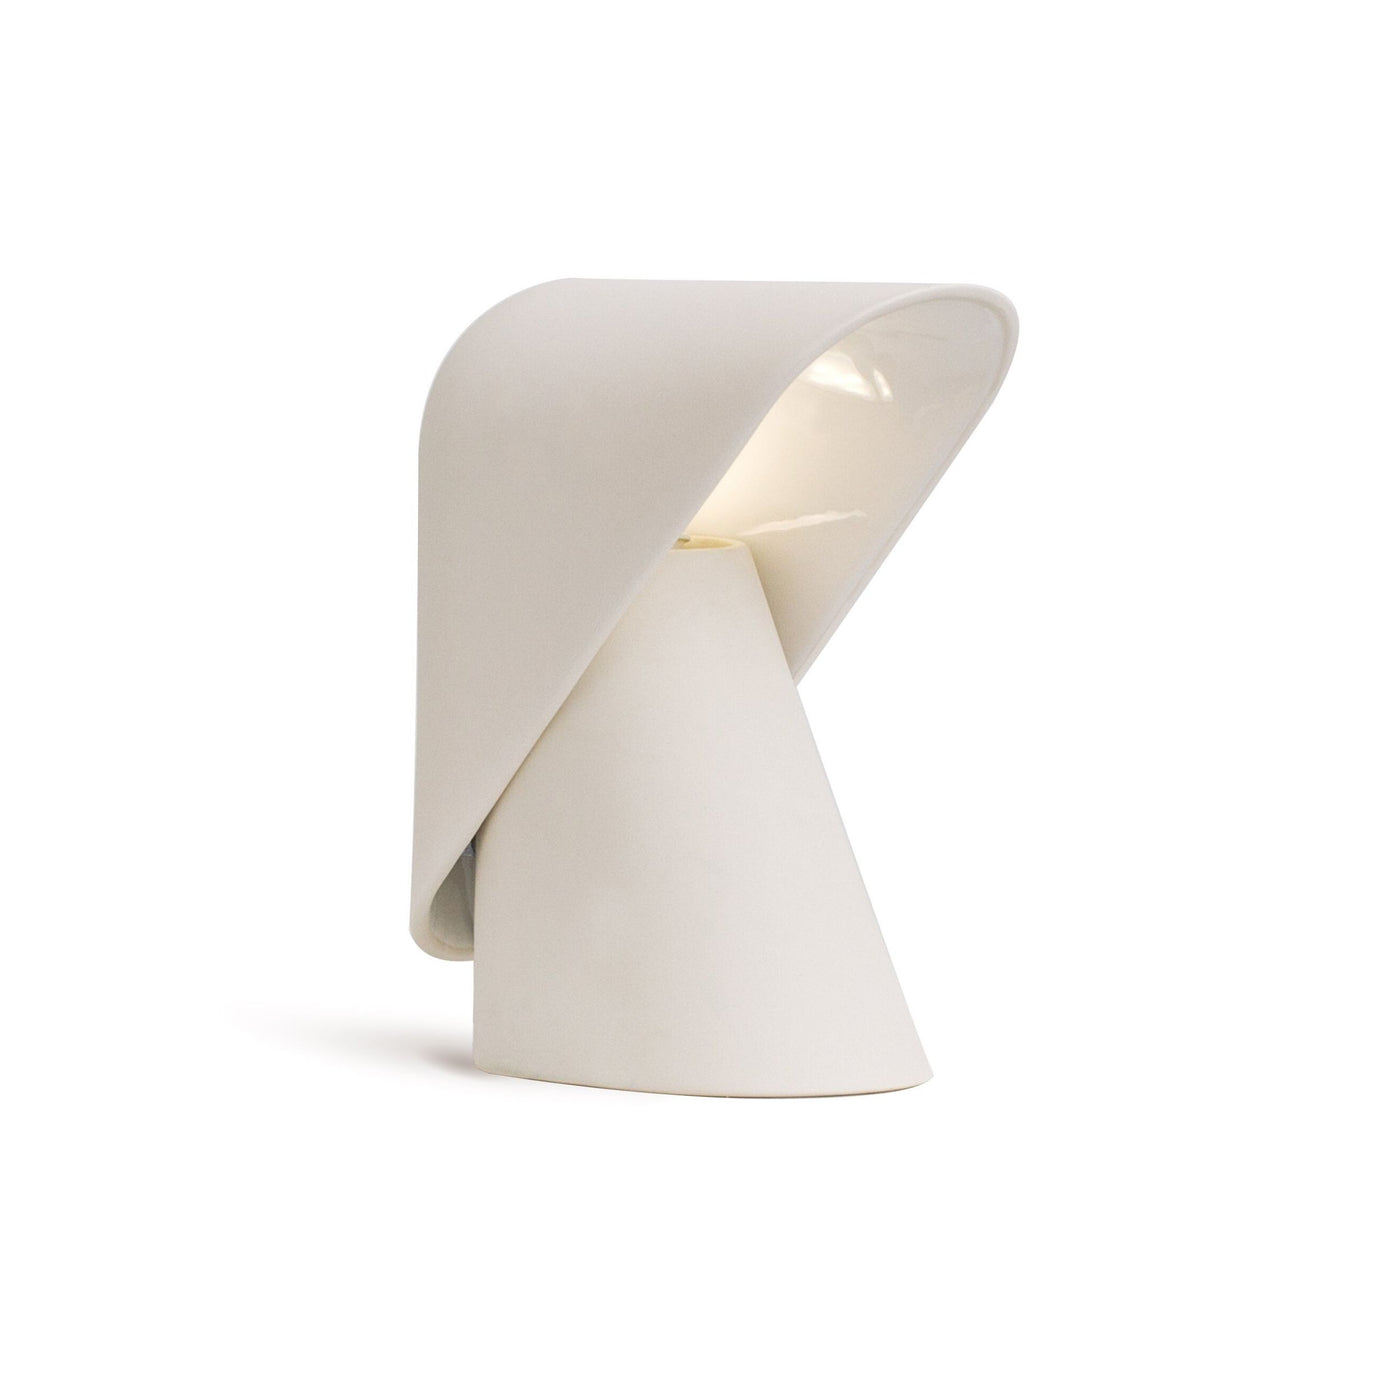 Vitamin K Lamp in Earthenware finish. Shop online at someday designs. #colour_earthenware